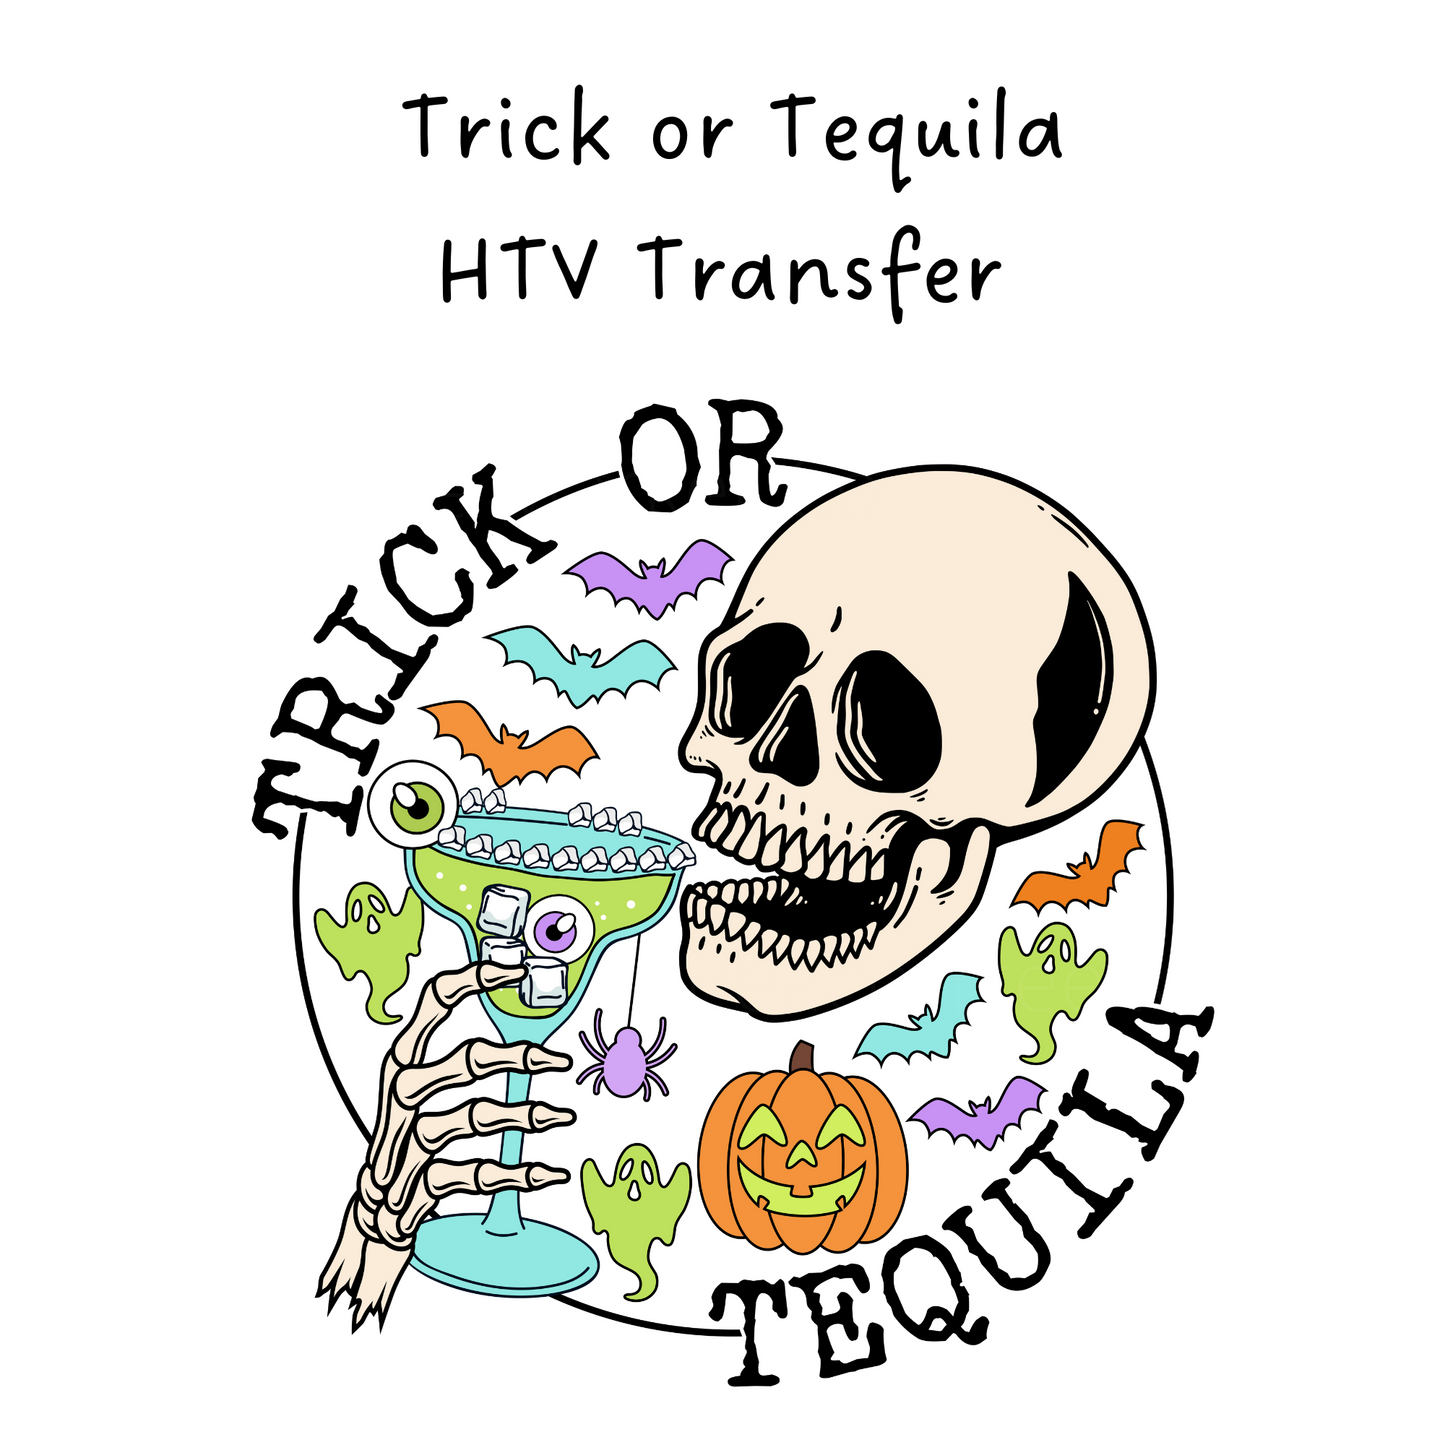 Trick Or Tequila HTV Transfer